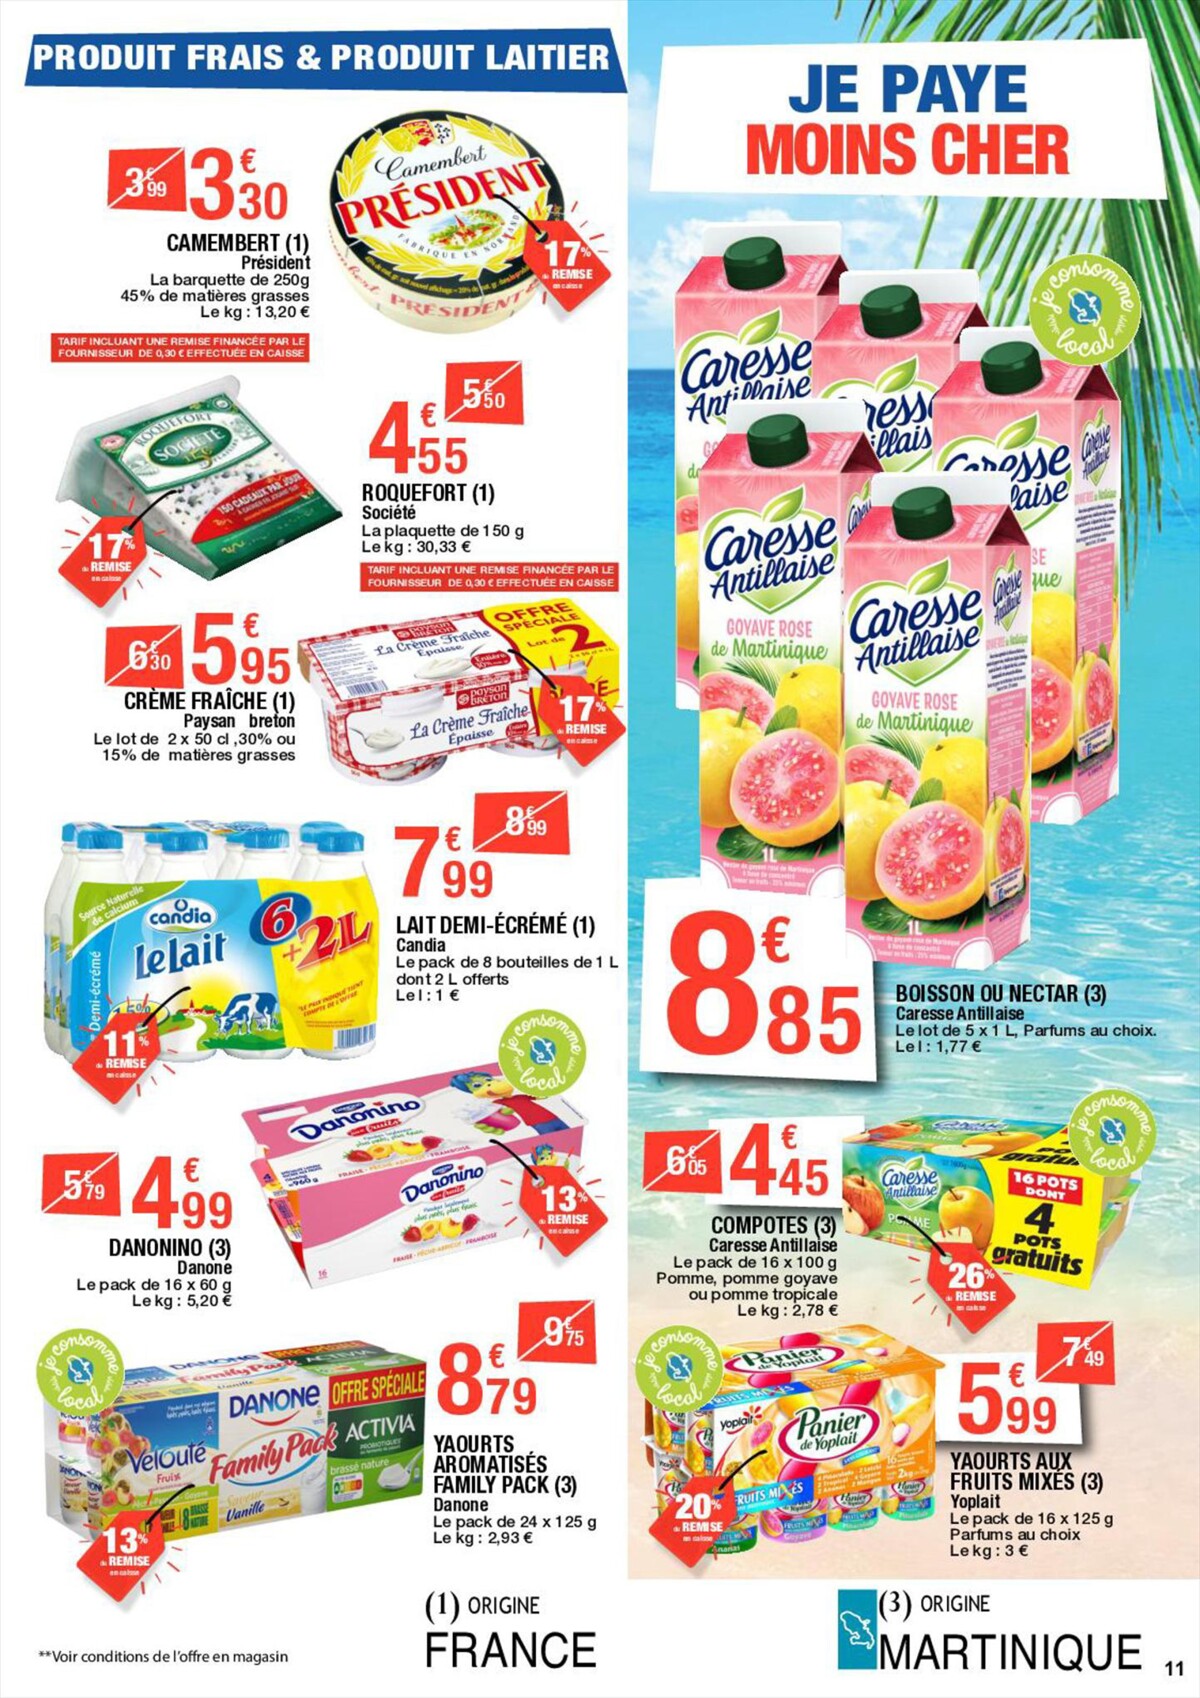 Catalogue Carrefour Special MDD, page 00011